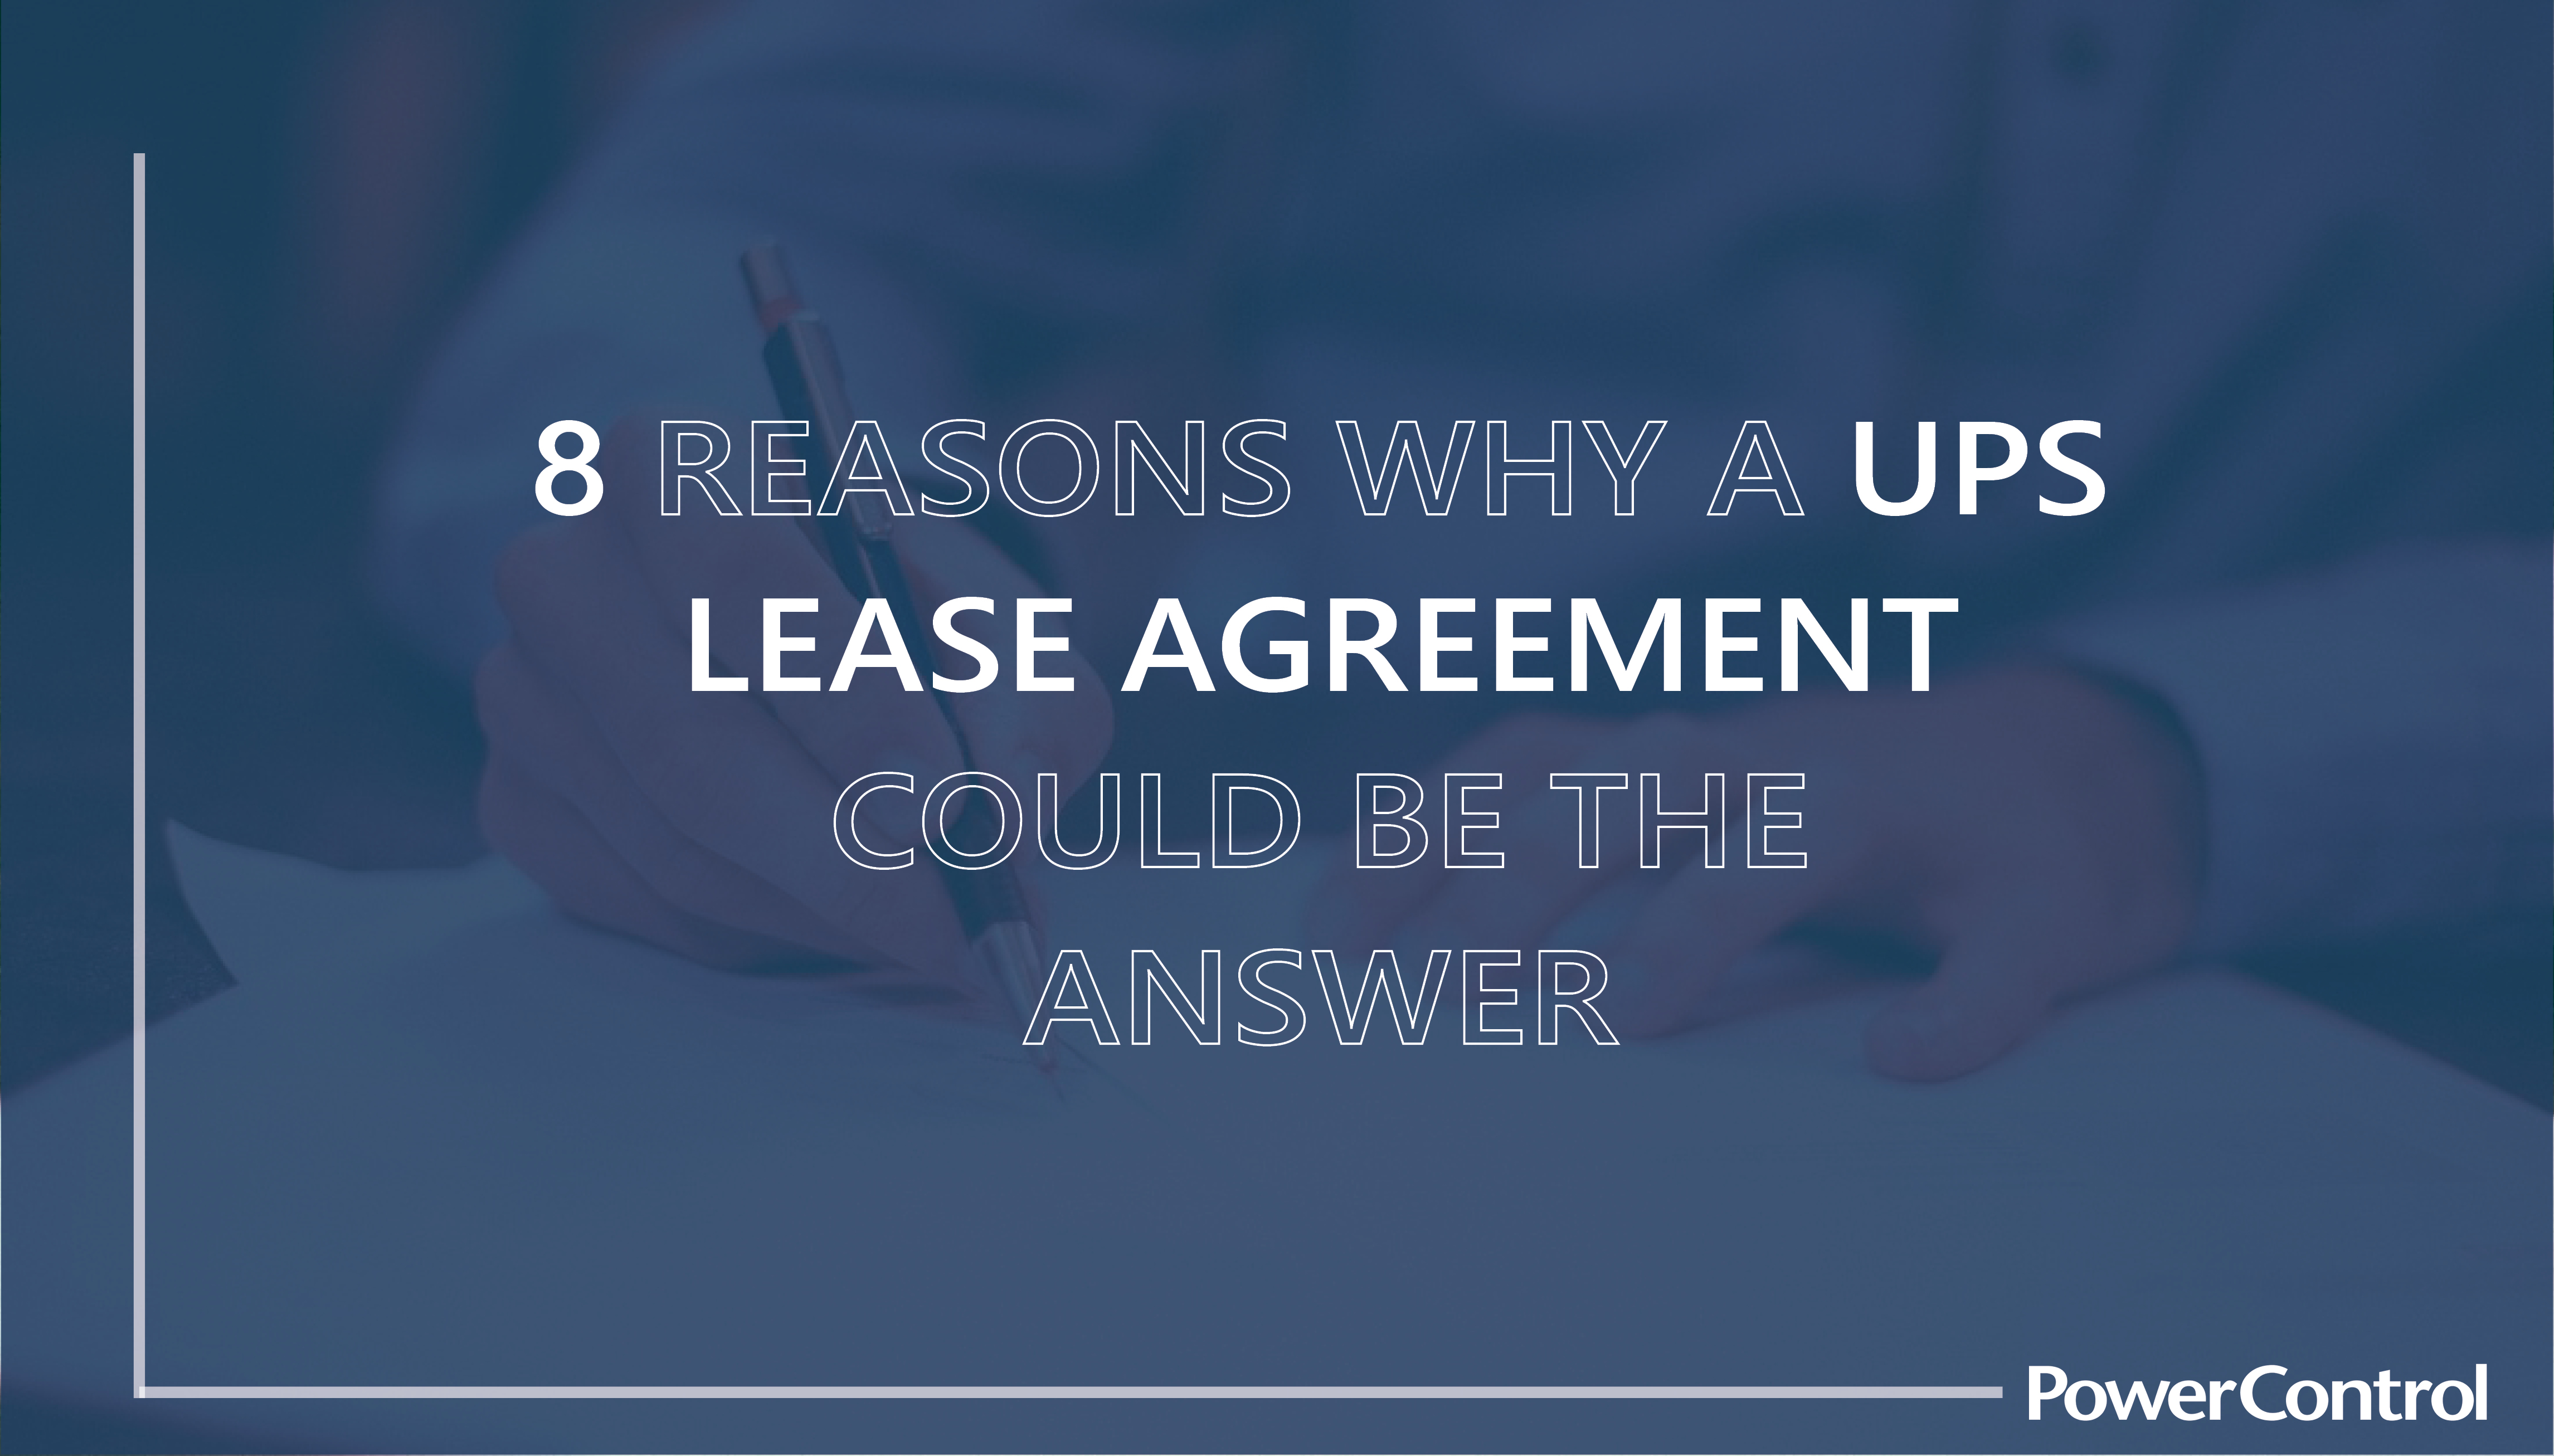 11 8 REASONS WHY A UPS LEASE AGREEMENT COULD BE THE ANSWER